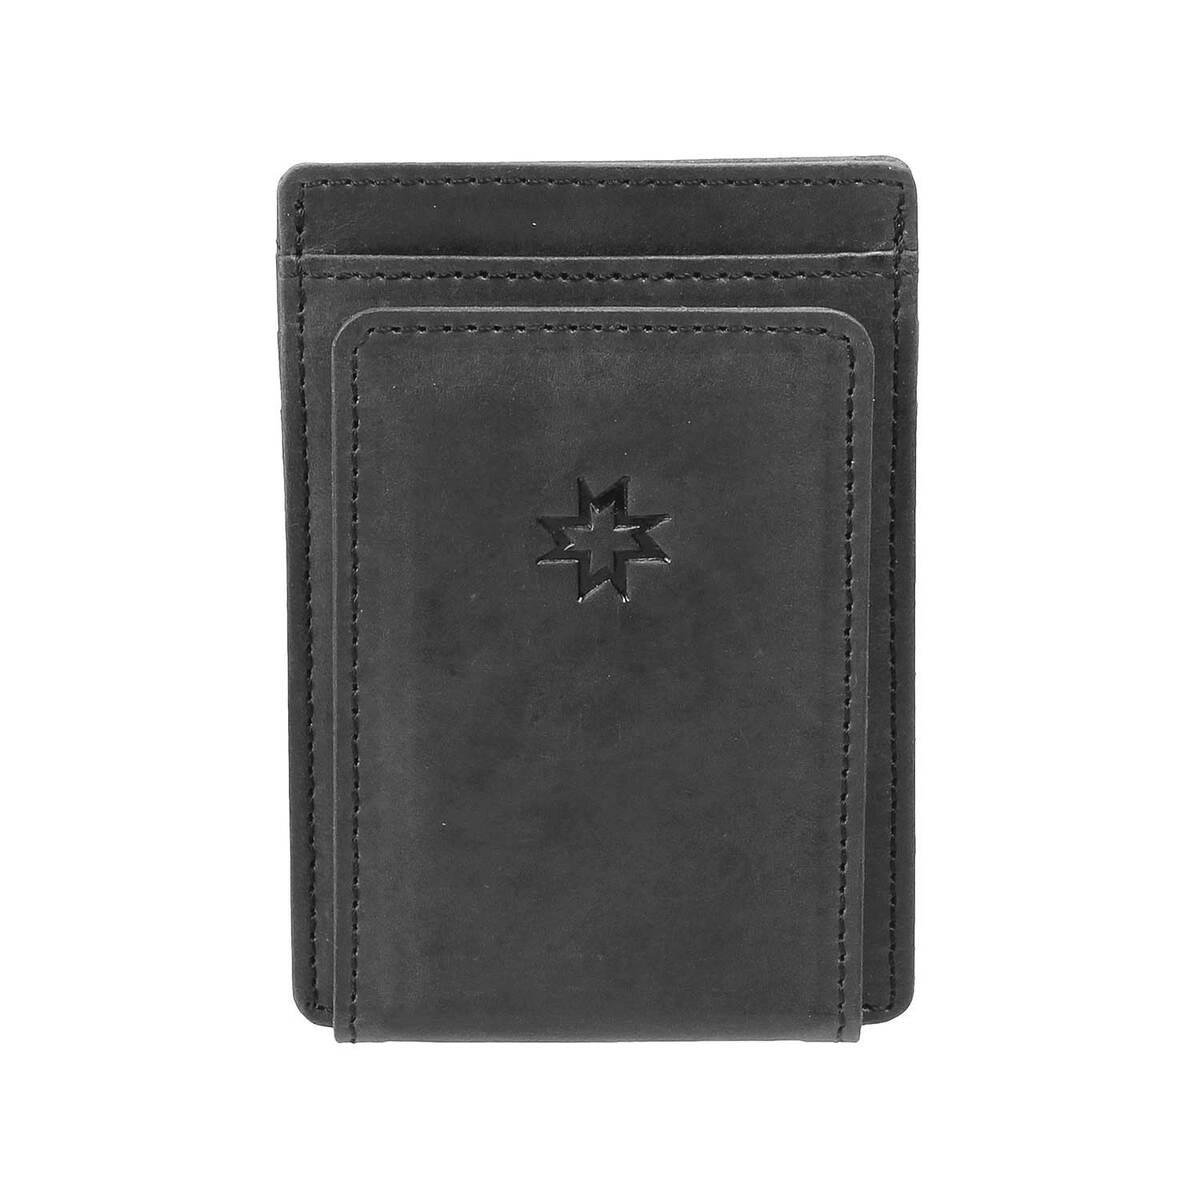 Personalized Leather Wallet For Men Tan: Gift/Send Fashion and Lifestyle  Gifts Online M11155353 |IGP.com